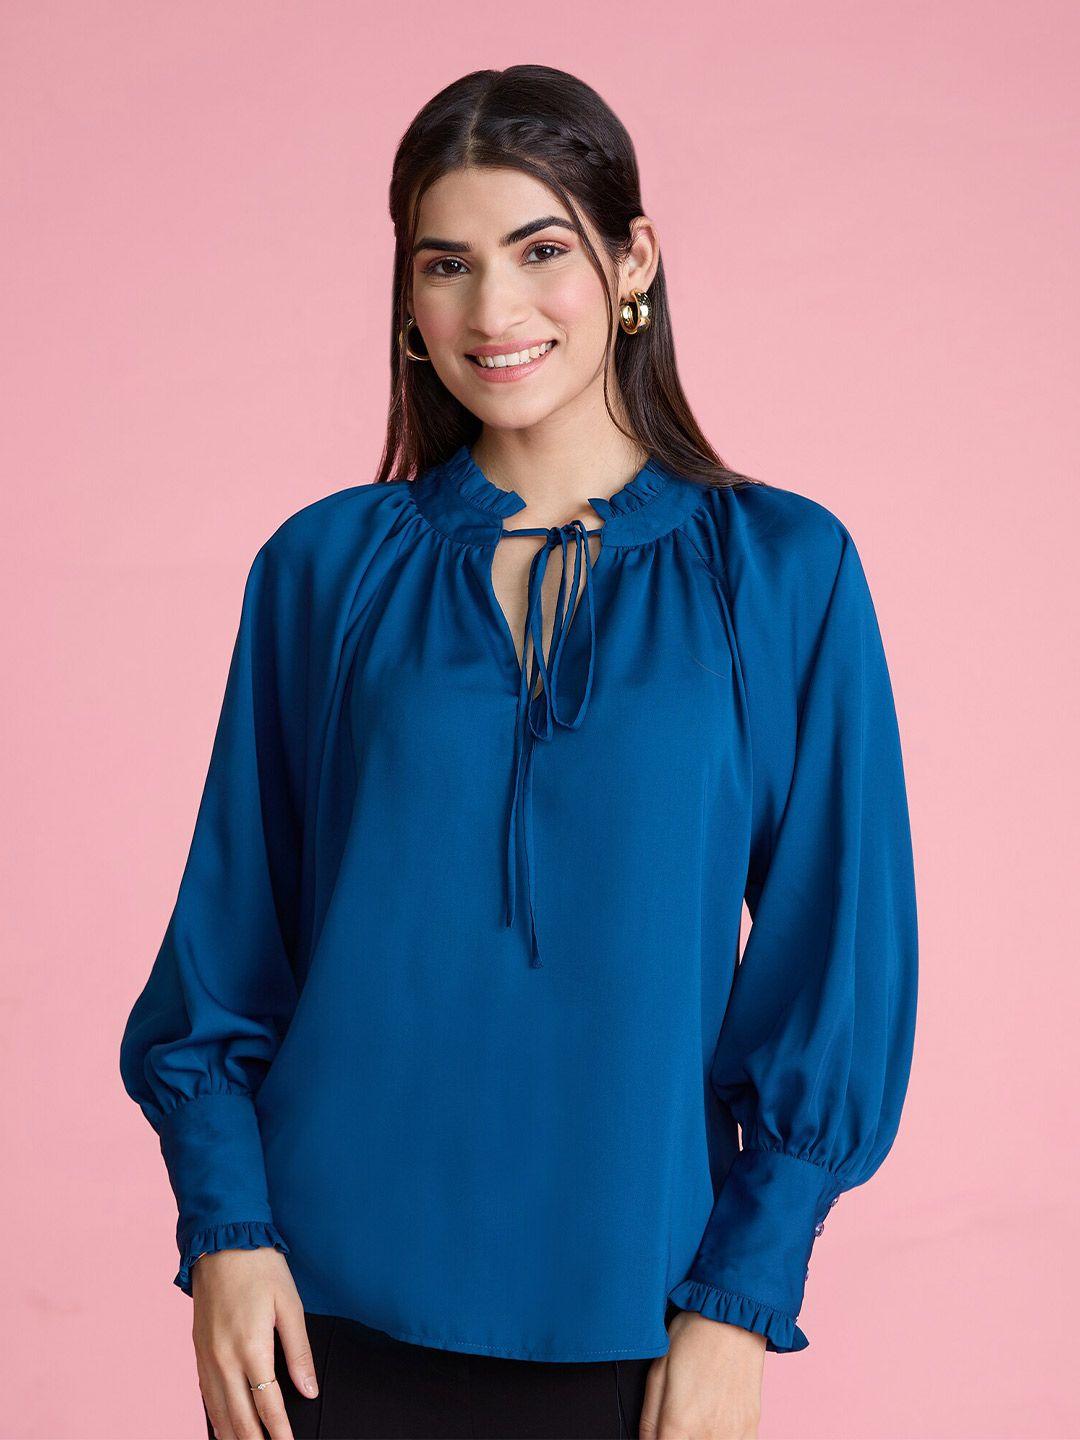 20dresses teal tie-up neck cuffed sleeves ruffled crepe top